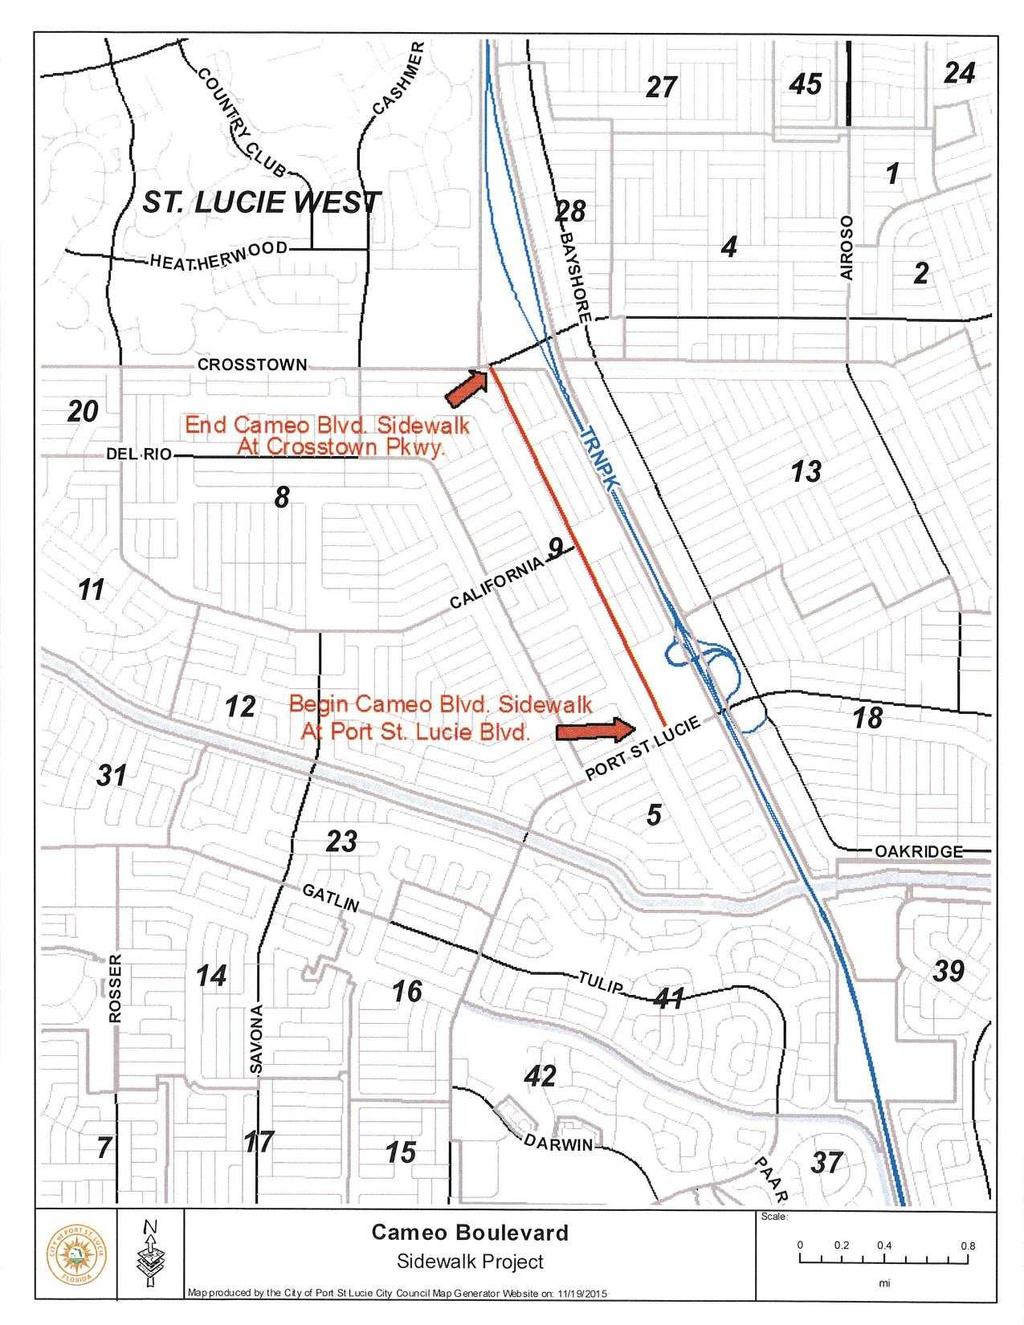 Cameo Boulevard Sidewalk Project Map produced by the Cty of Port St Lucie City